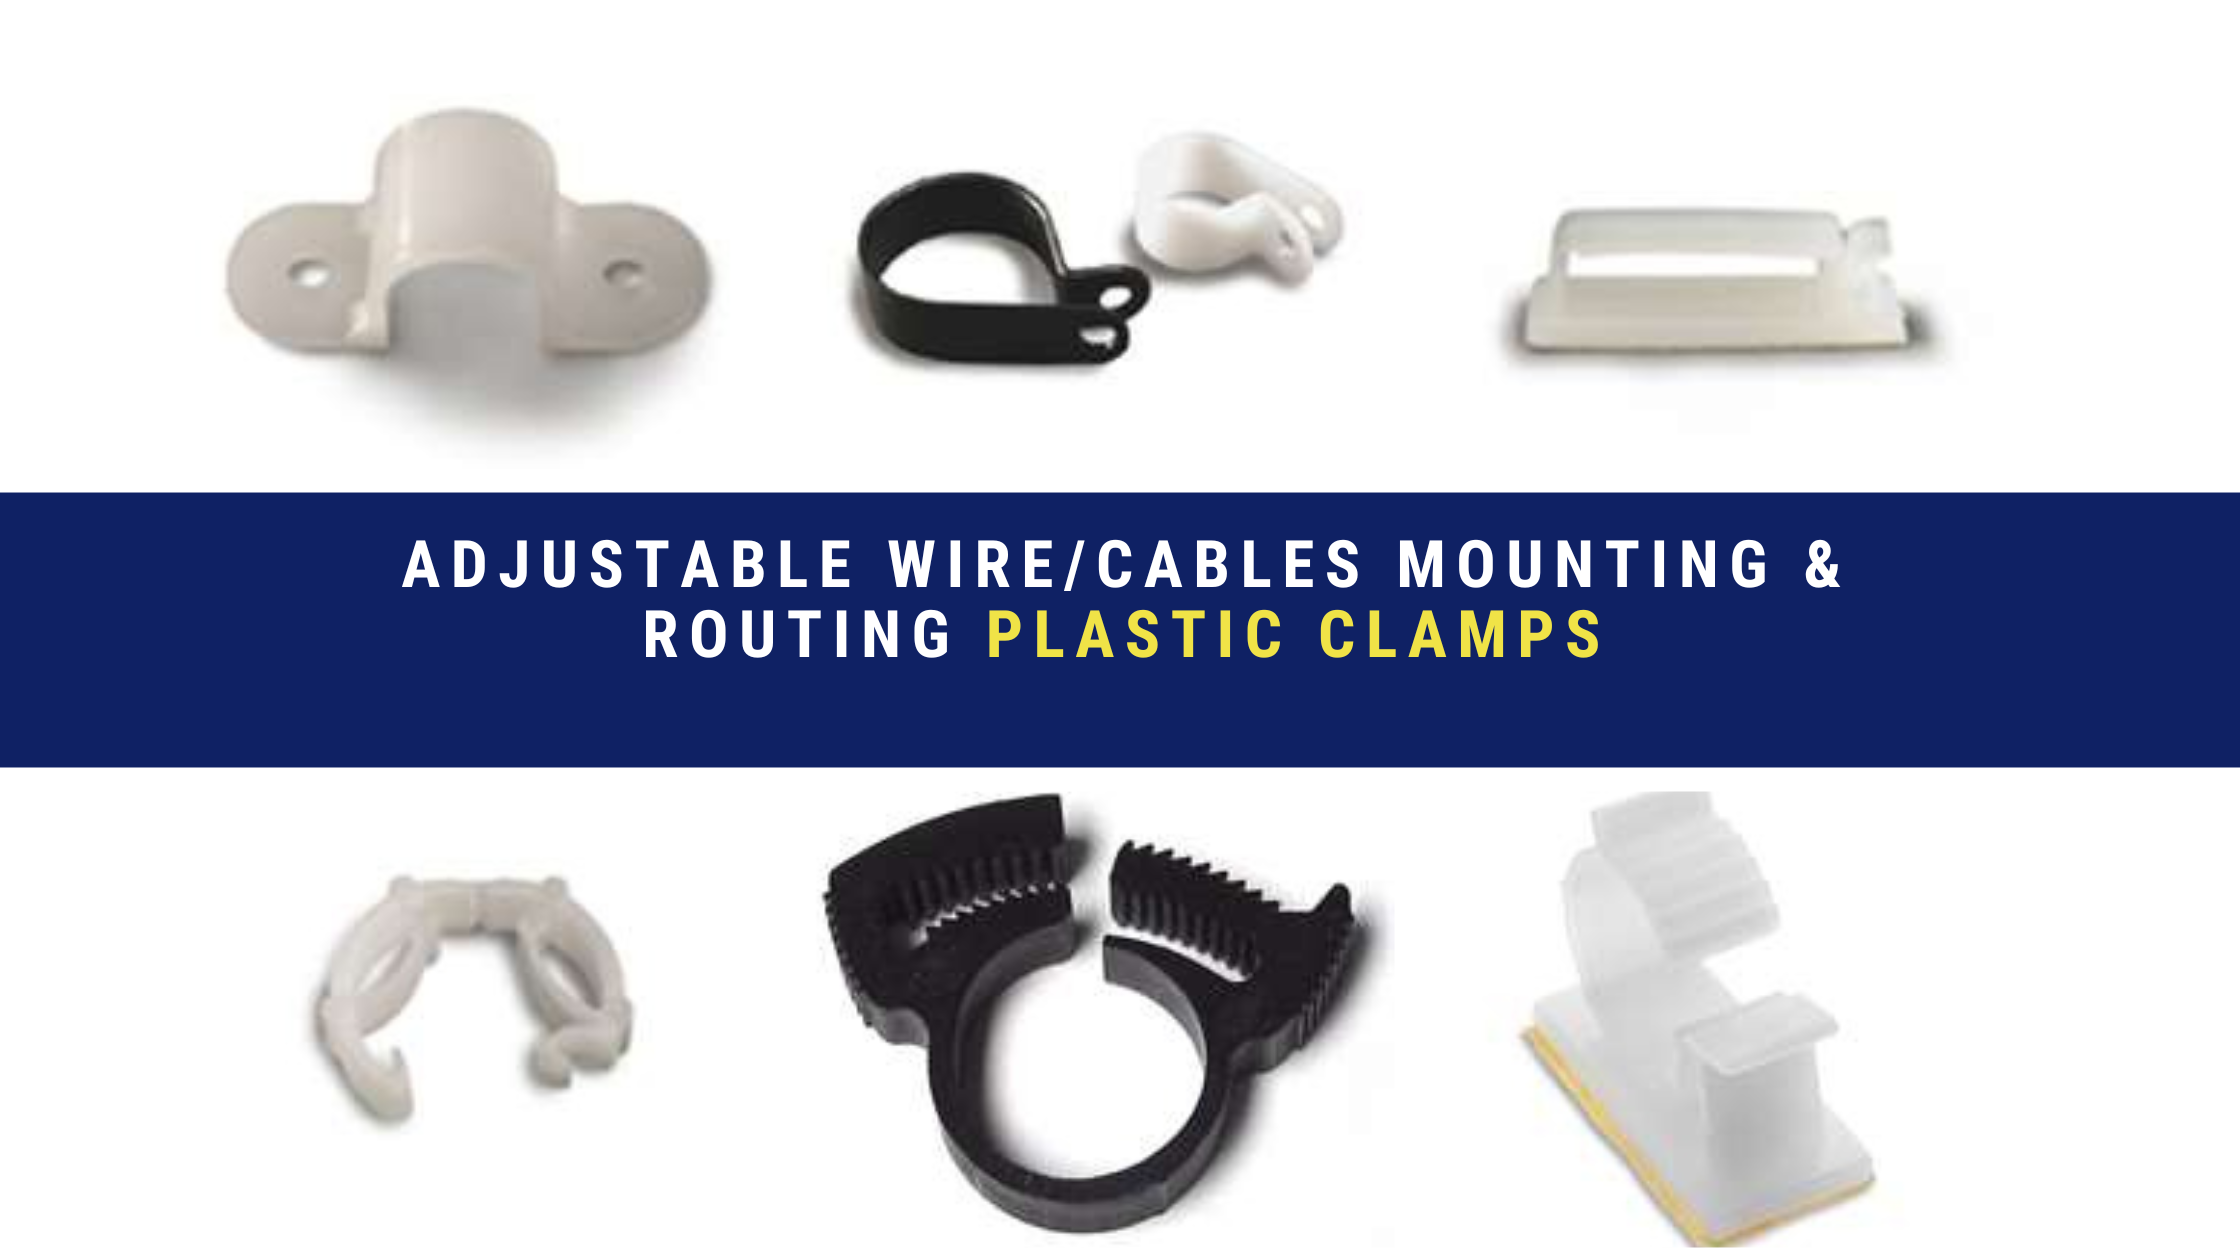 Adjustable Plastic Clamps – A Versatile Releasable Clamp for Bundling and Securing Wires and Cables